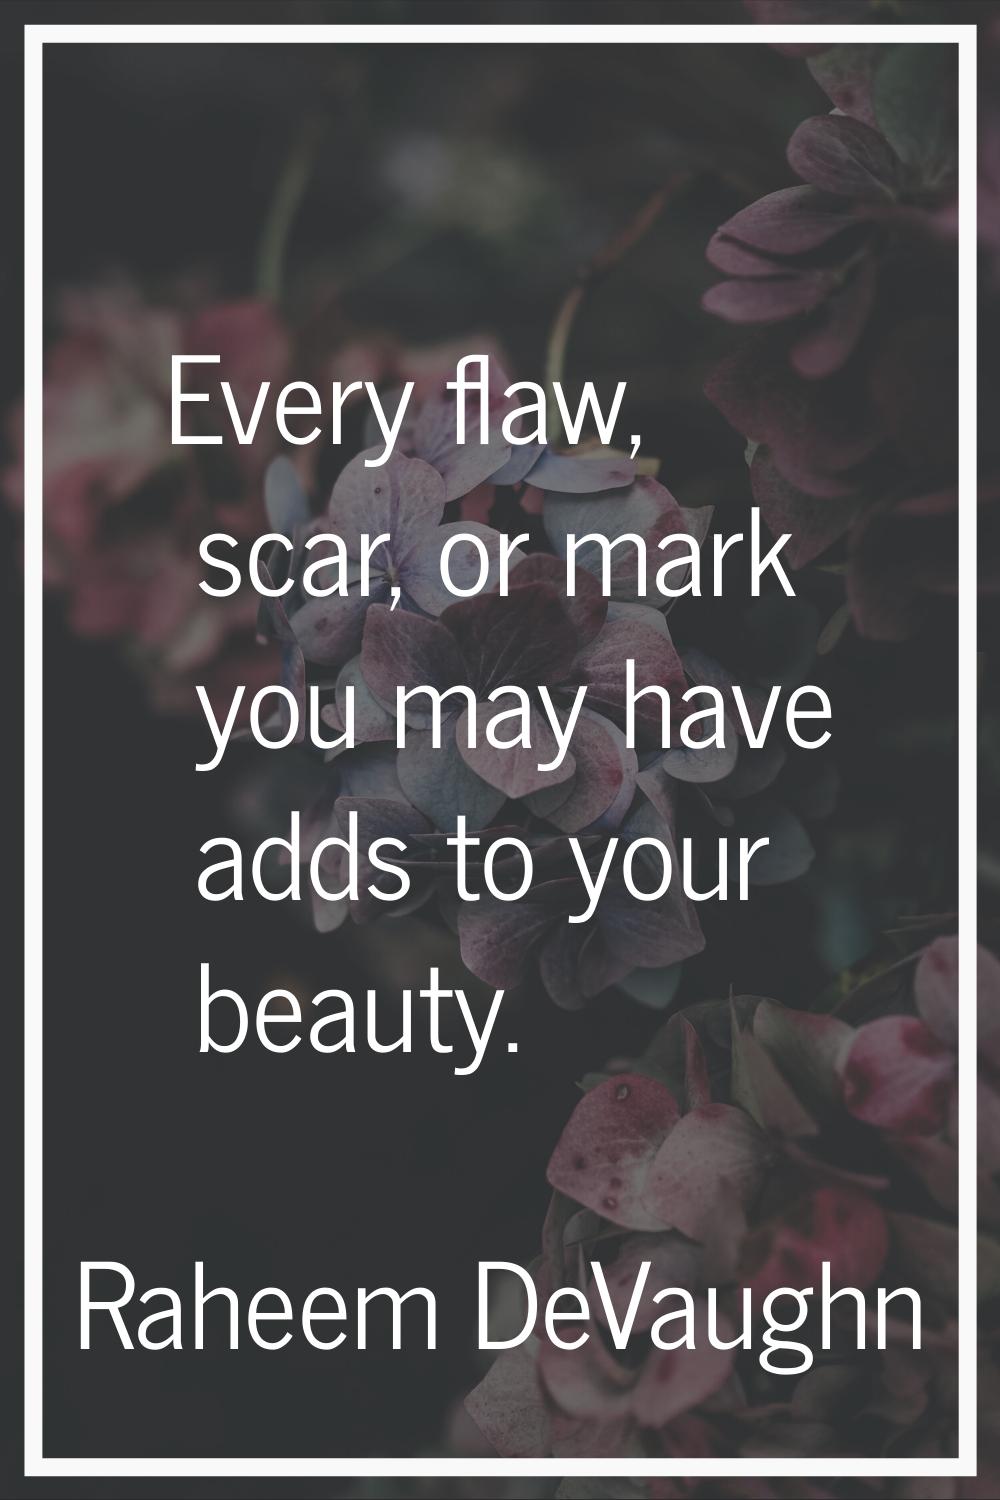 Every flaw, scar, or mark you may have adds to your beauty.